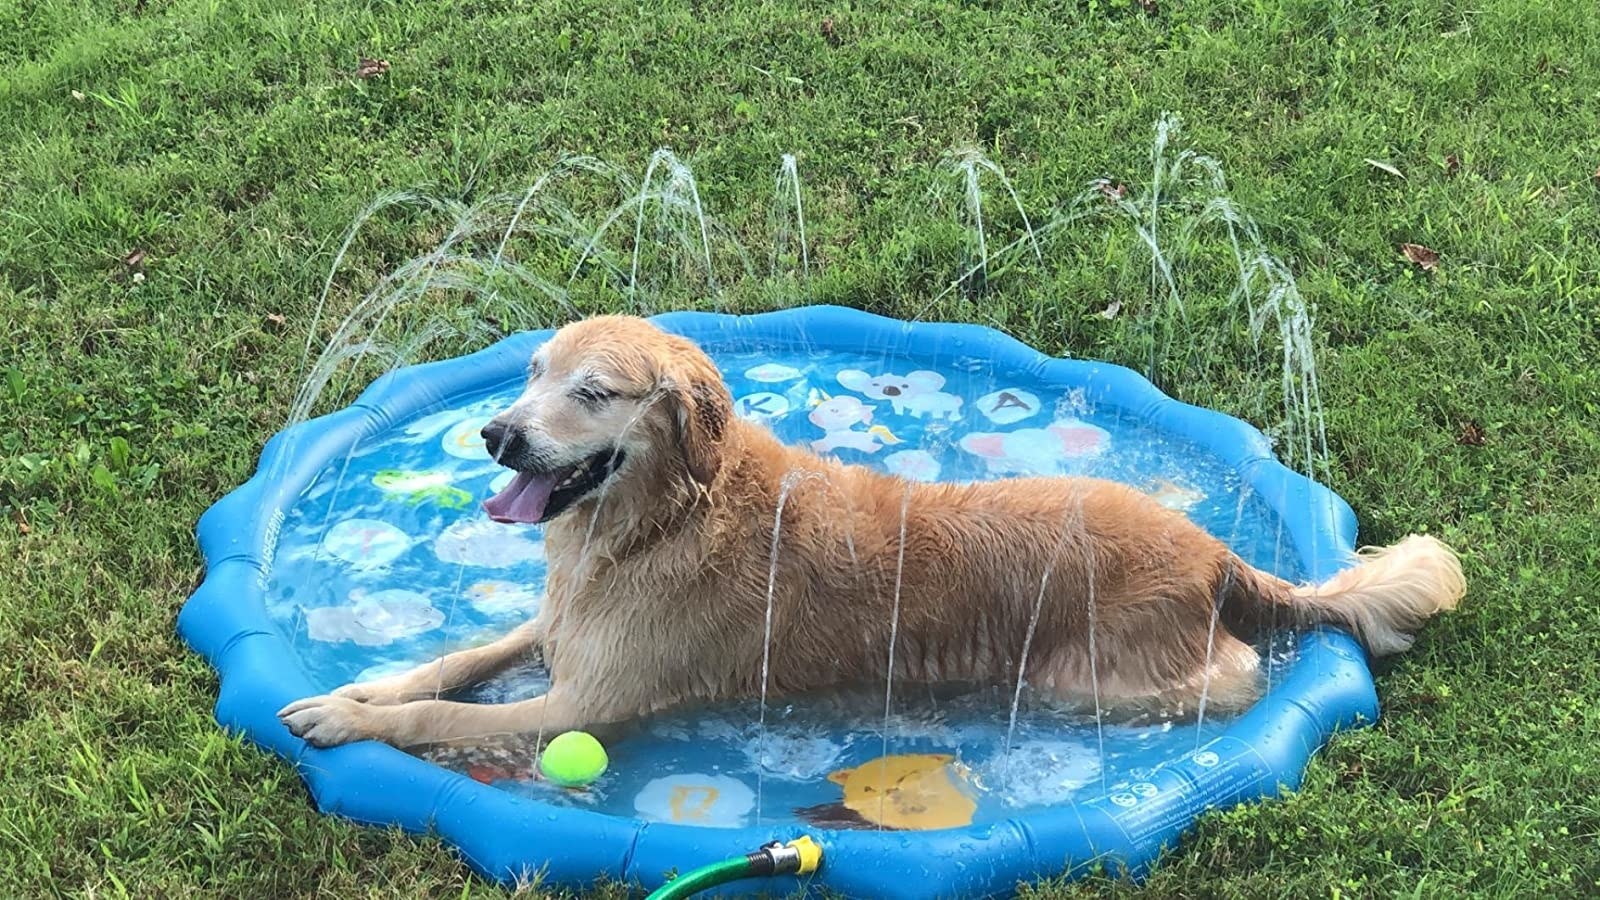 golden retriever relaxing on the circular blue plastic pad; a low wall around the edge holds a few inches of water in the center, and sprays water vertically every few inches